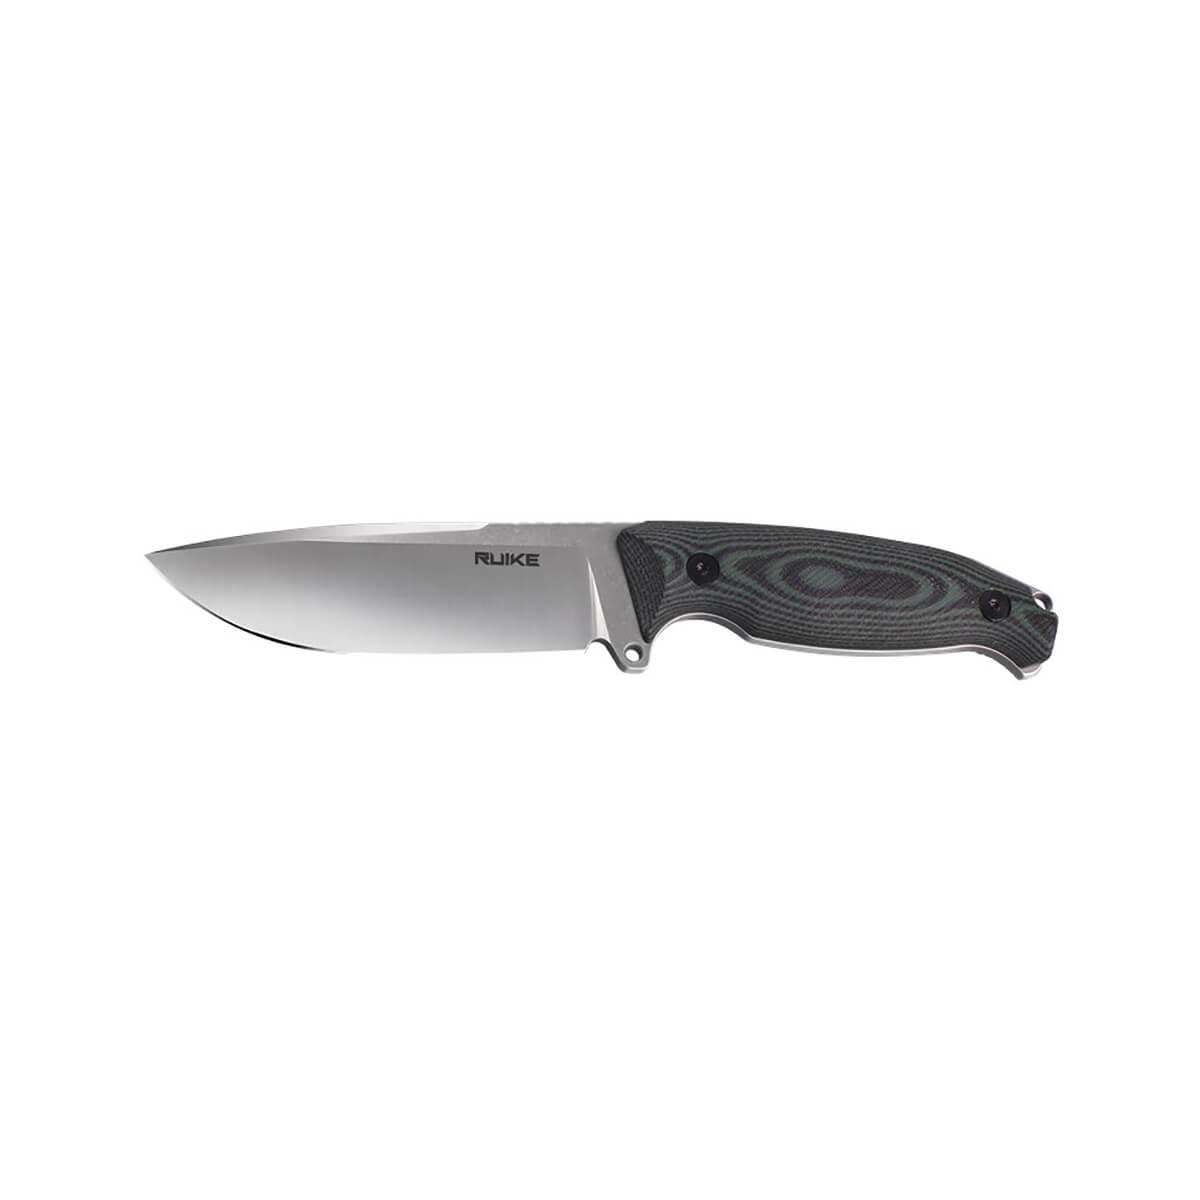  Jager F118 Fixed Blade Knife